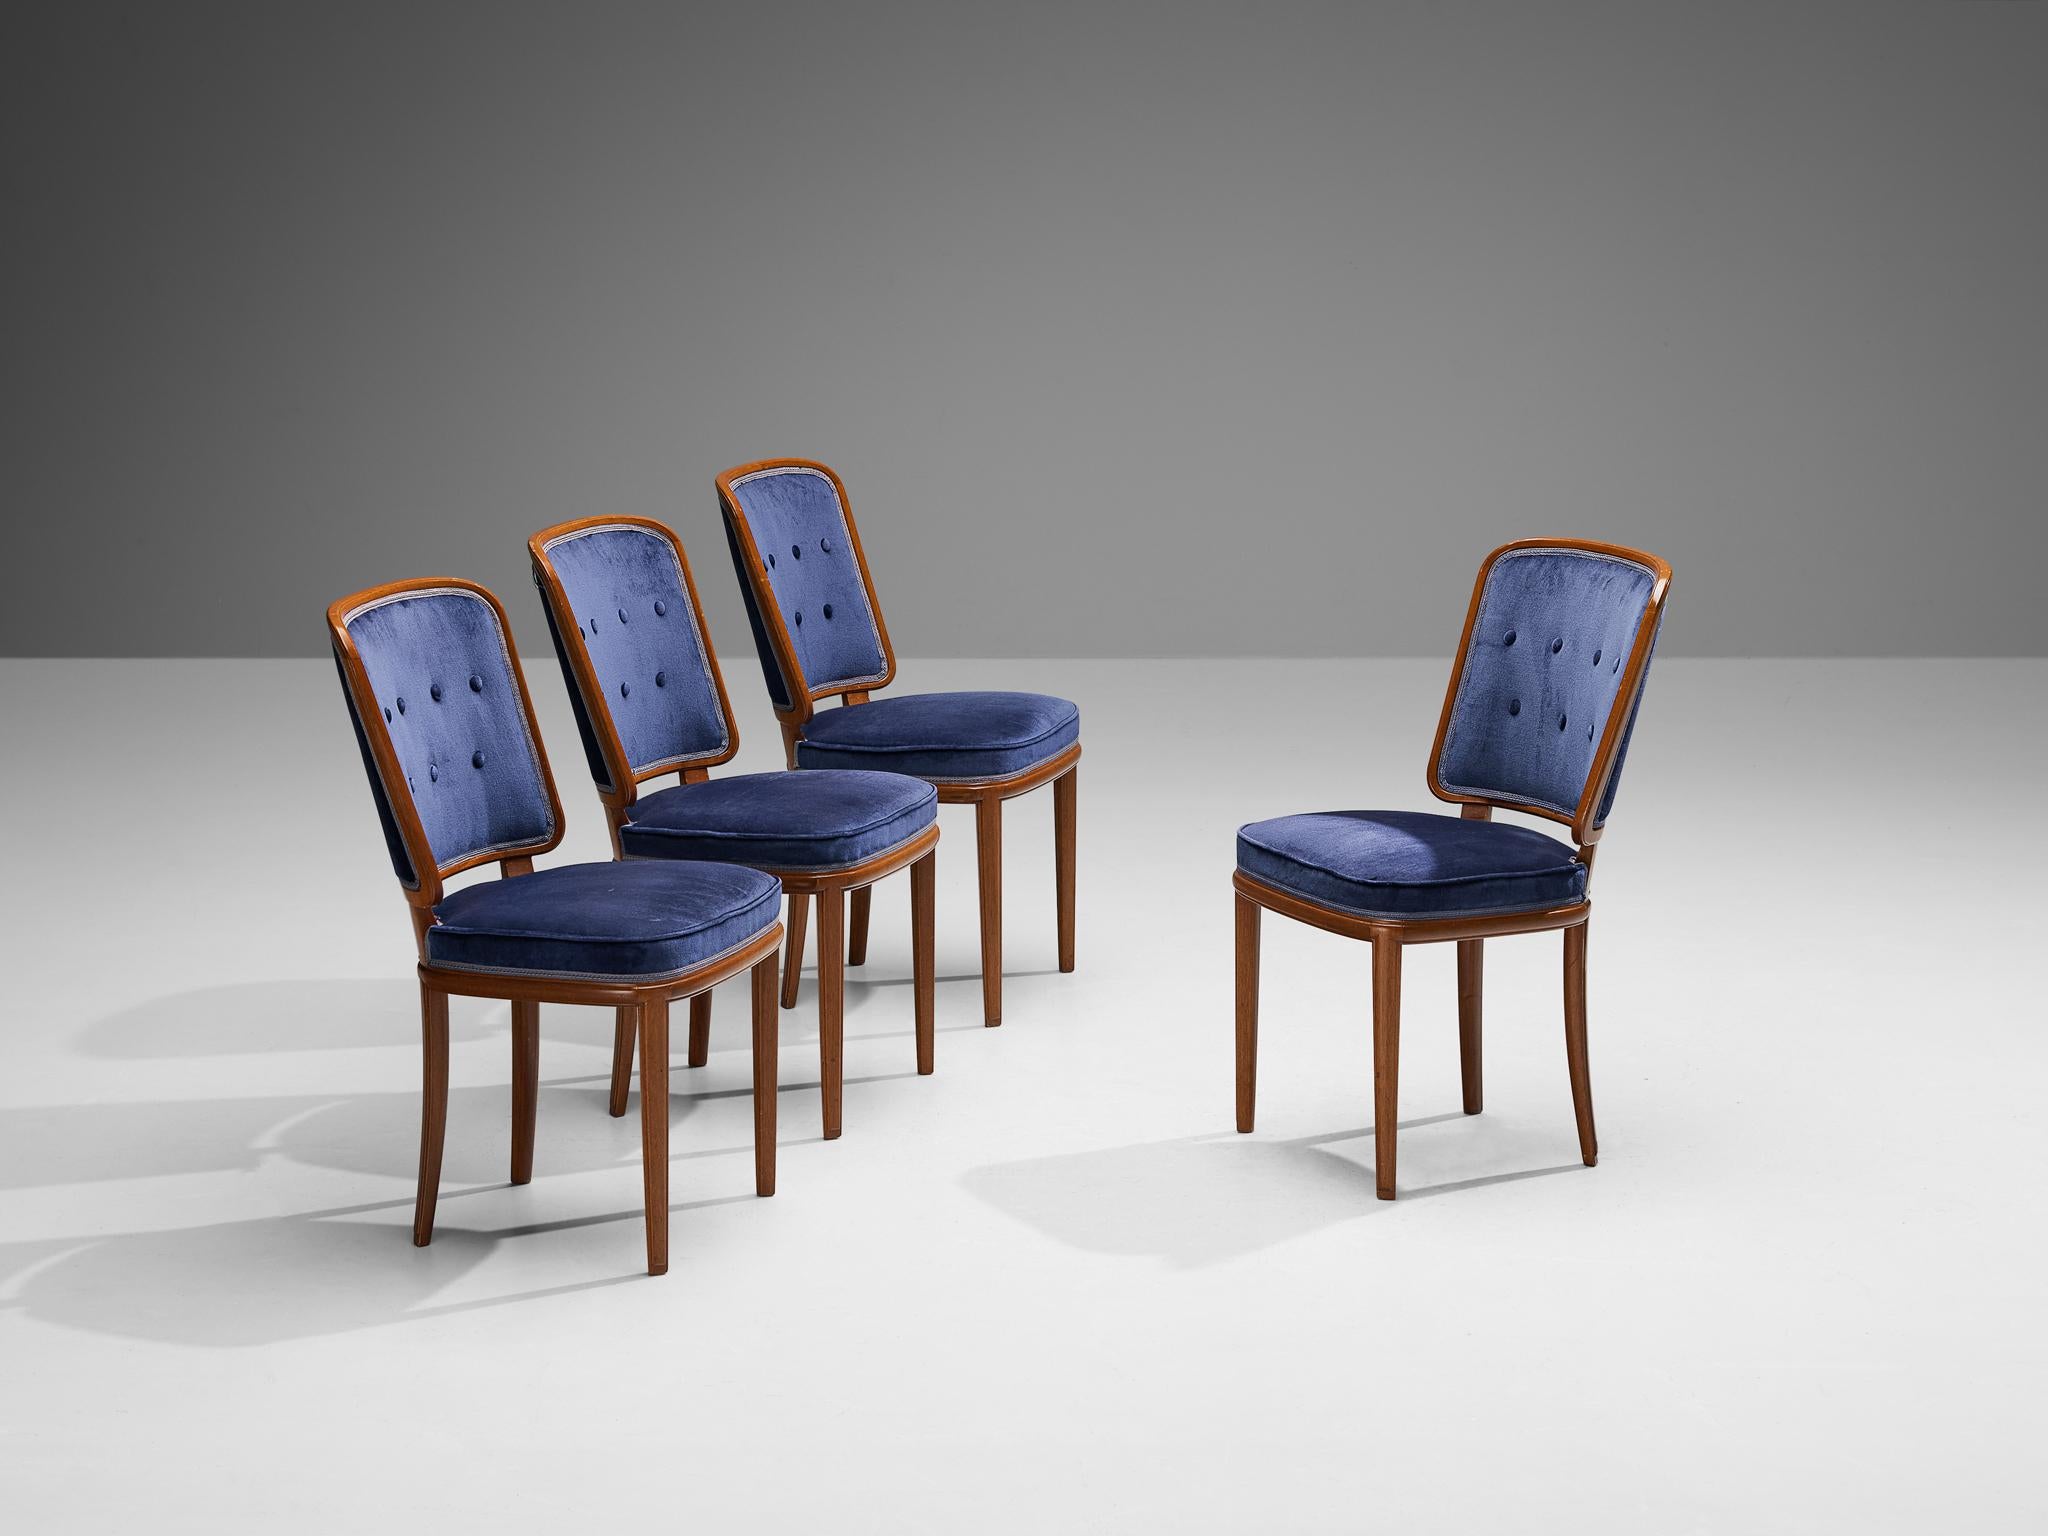 Carl Malmsten, set of four dining chairs, walnut, velvet, Sweden, 1940s

Designed by Carl Malmsten in the forties, these dining chairs have a beautiful elegant silhouette executed with the finest materials. The chair owns its sophisticated look by